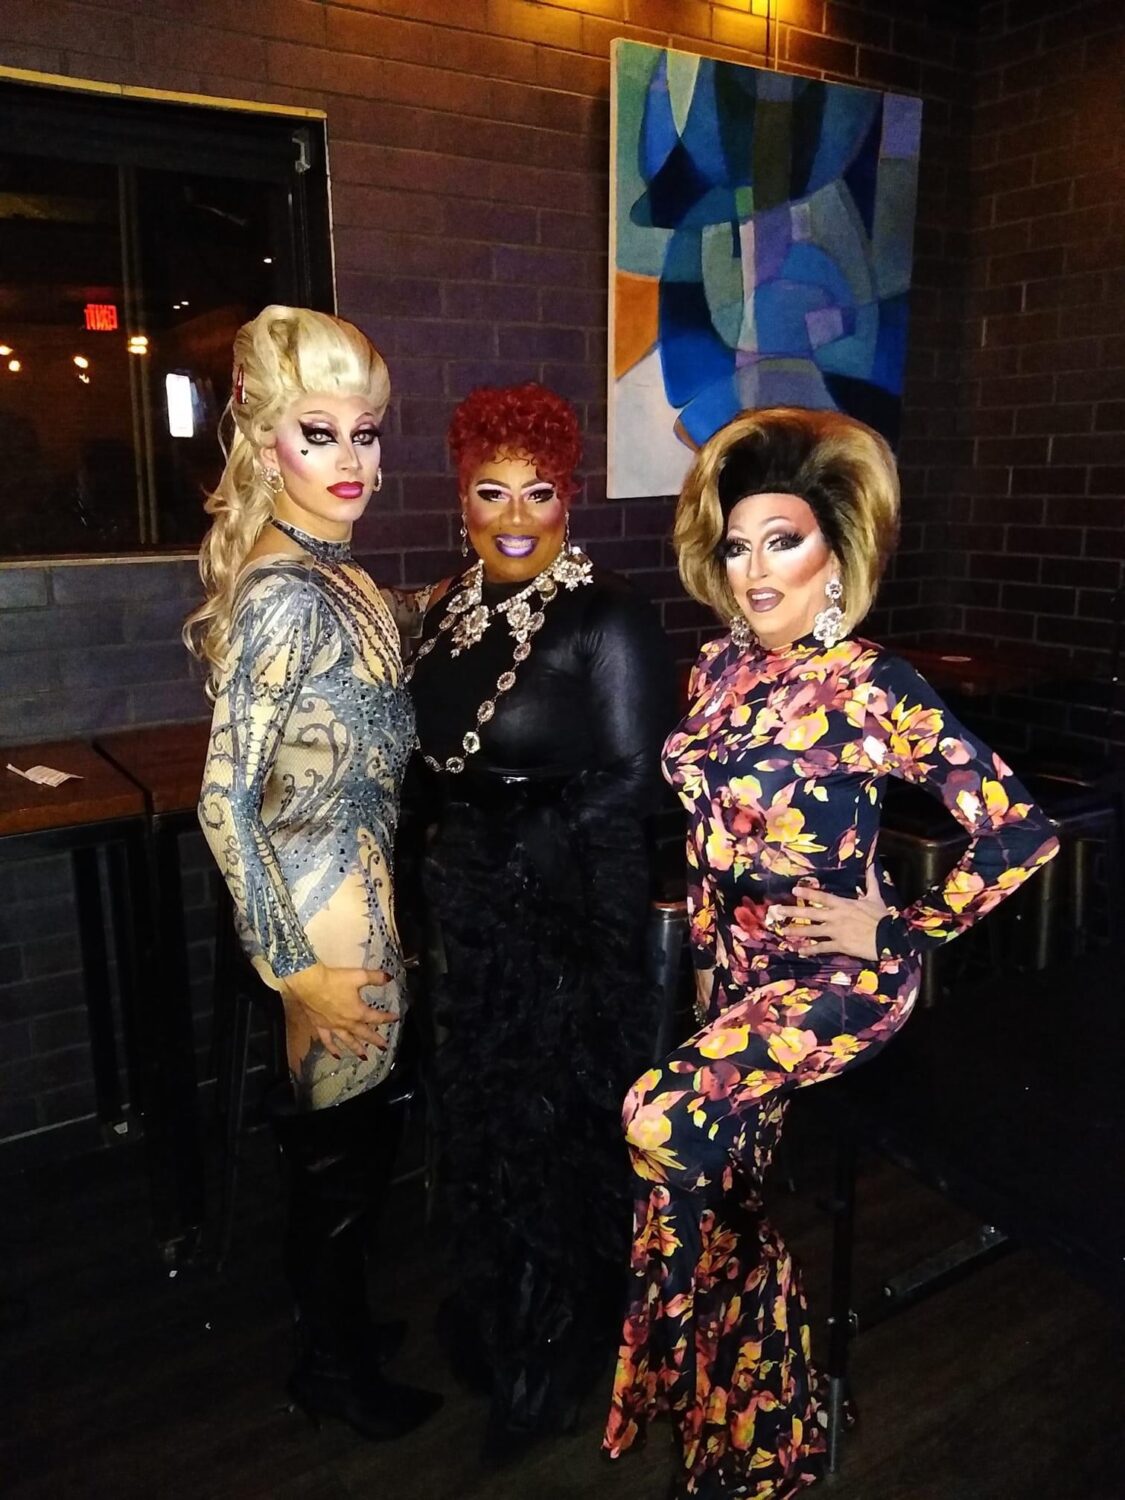 Blonde Vanity, Vee Love and Samantha Rollins at Union Cafe (Columbus, Ohio) | September 2021